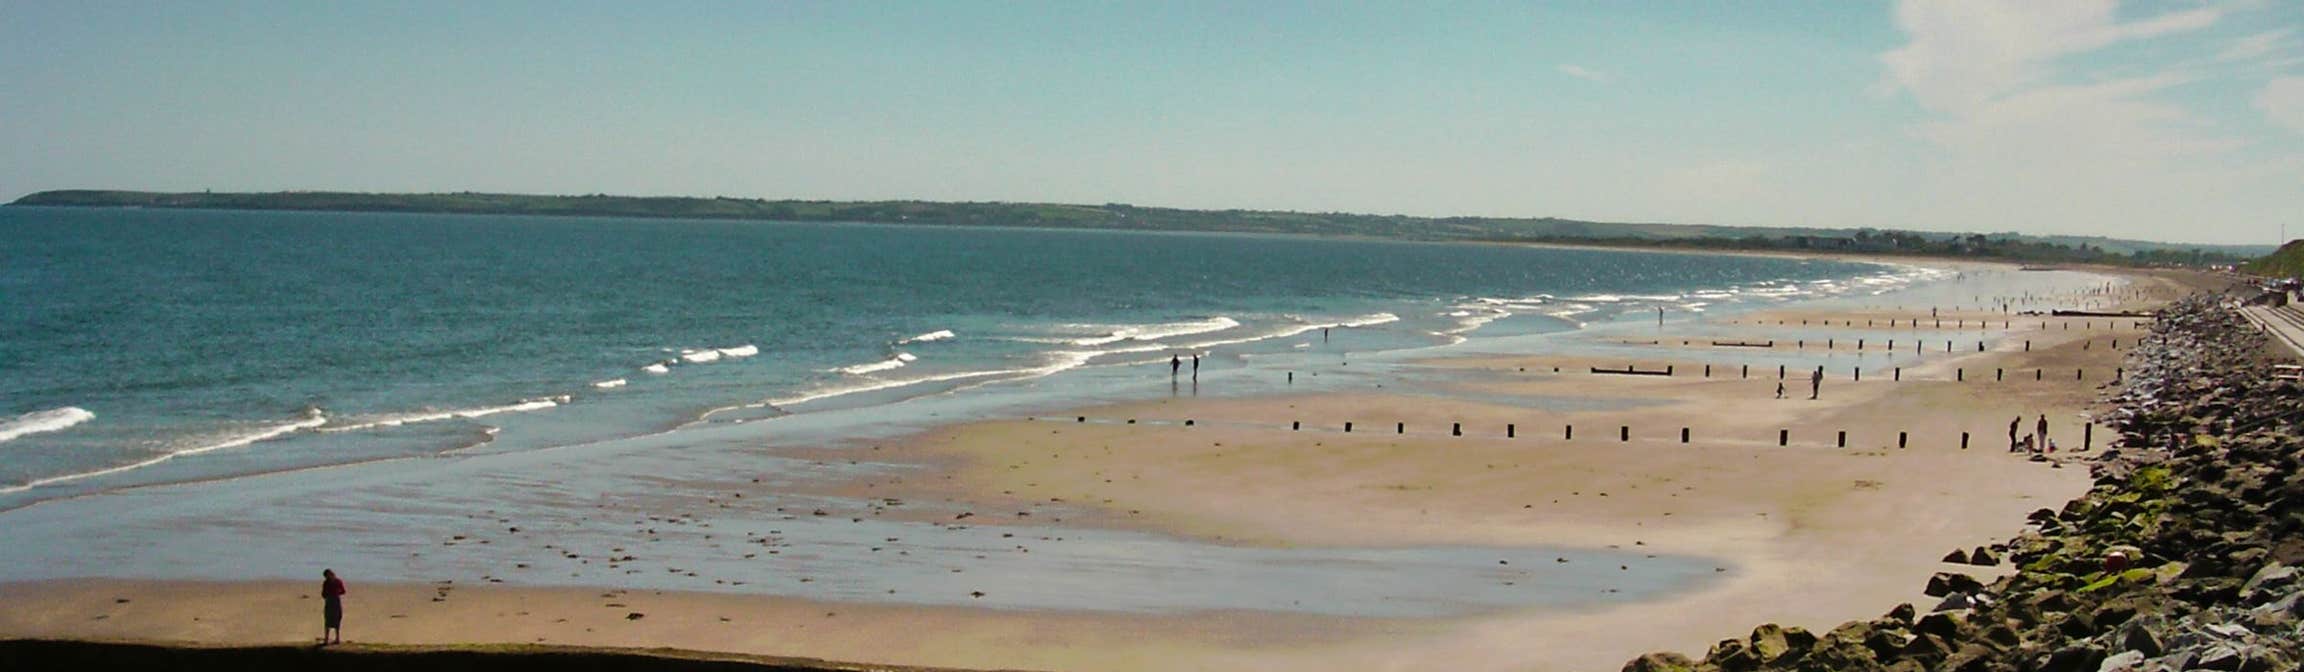 Image of a beach in Youghal in County Cork